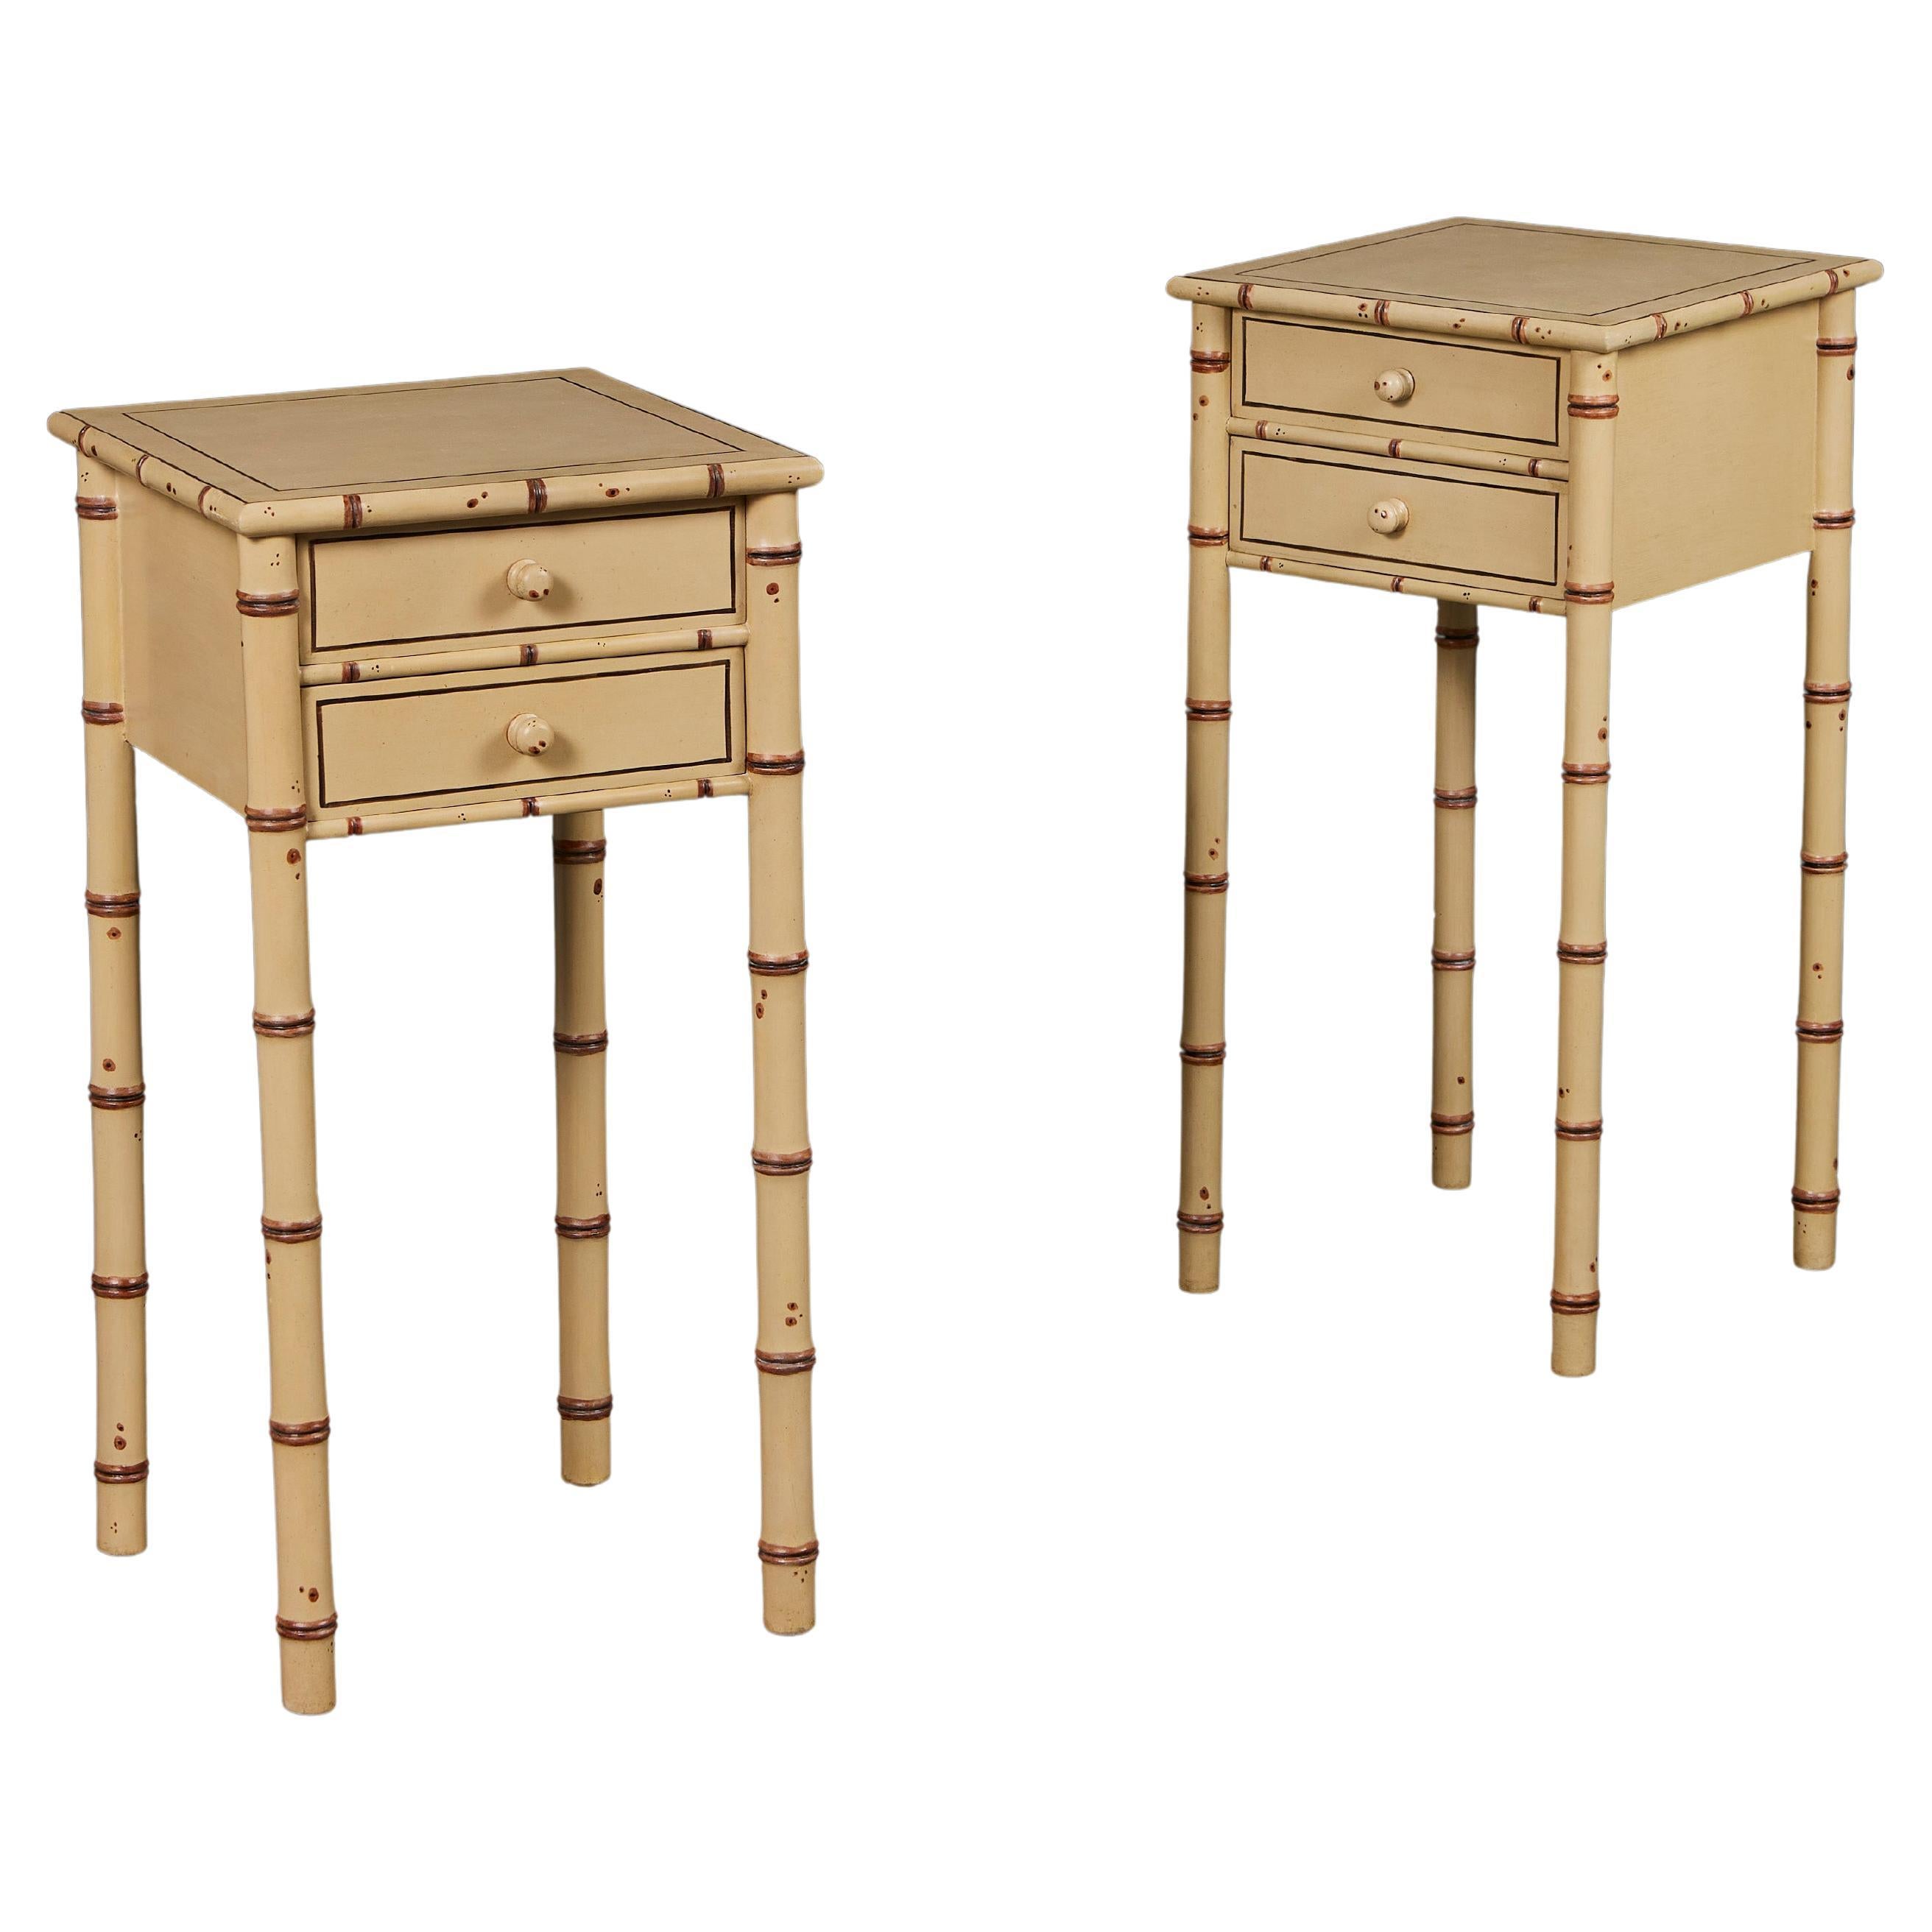 A Pair of English Edwardian Faux Bamboo Painted Bedside Tables